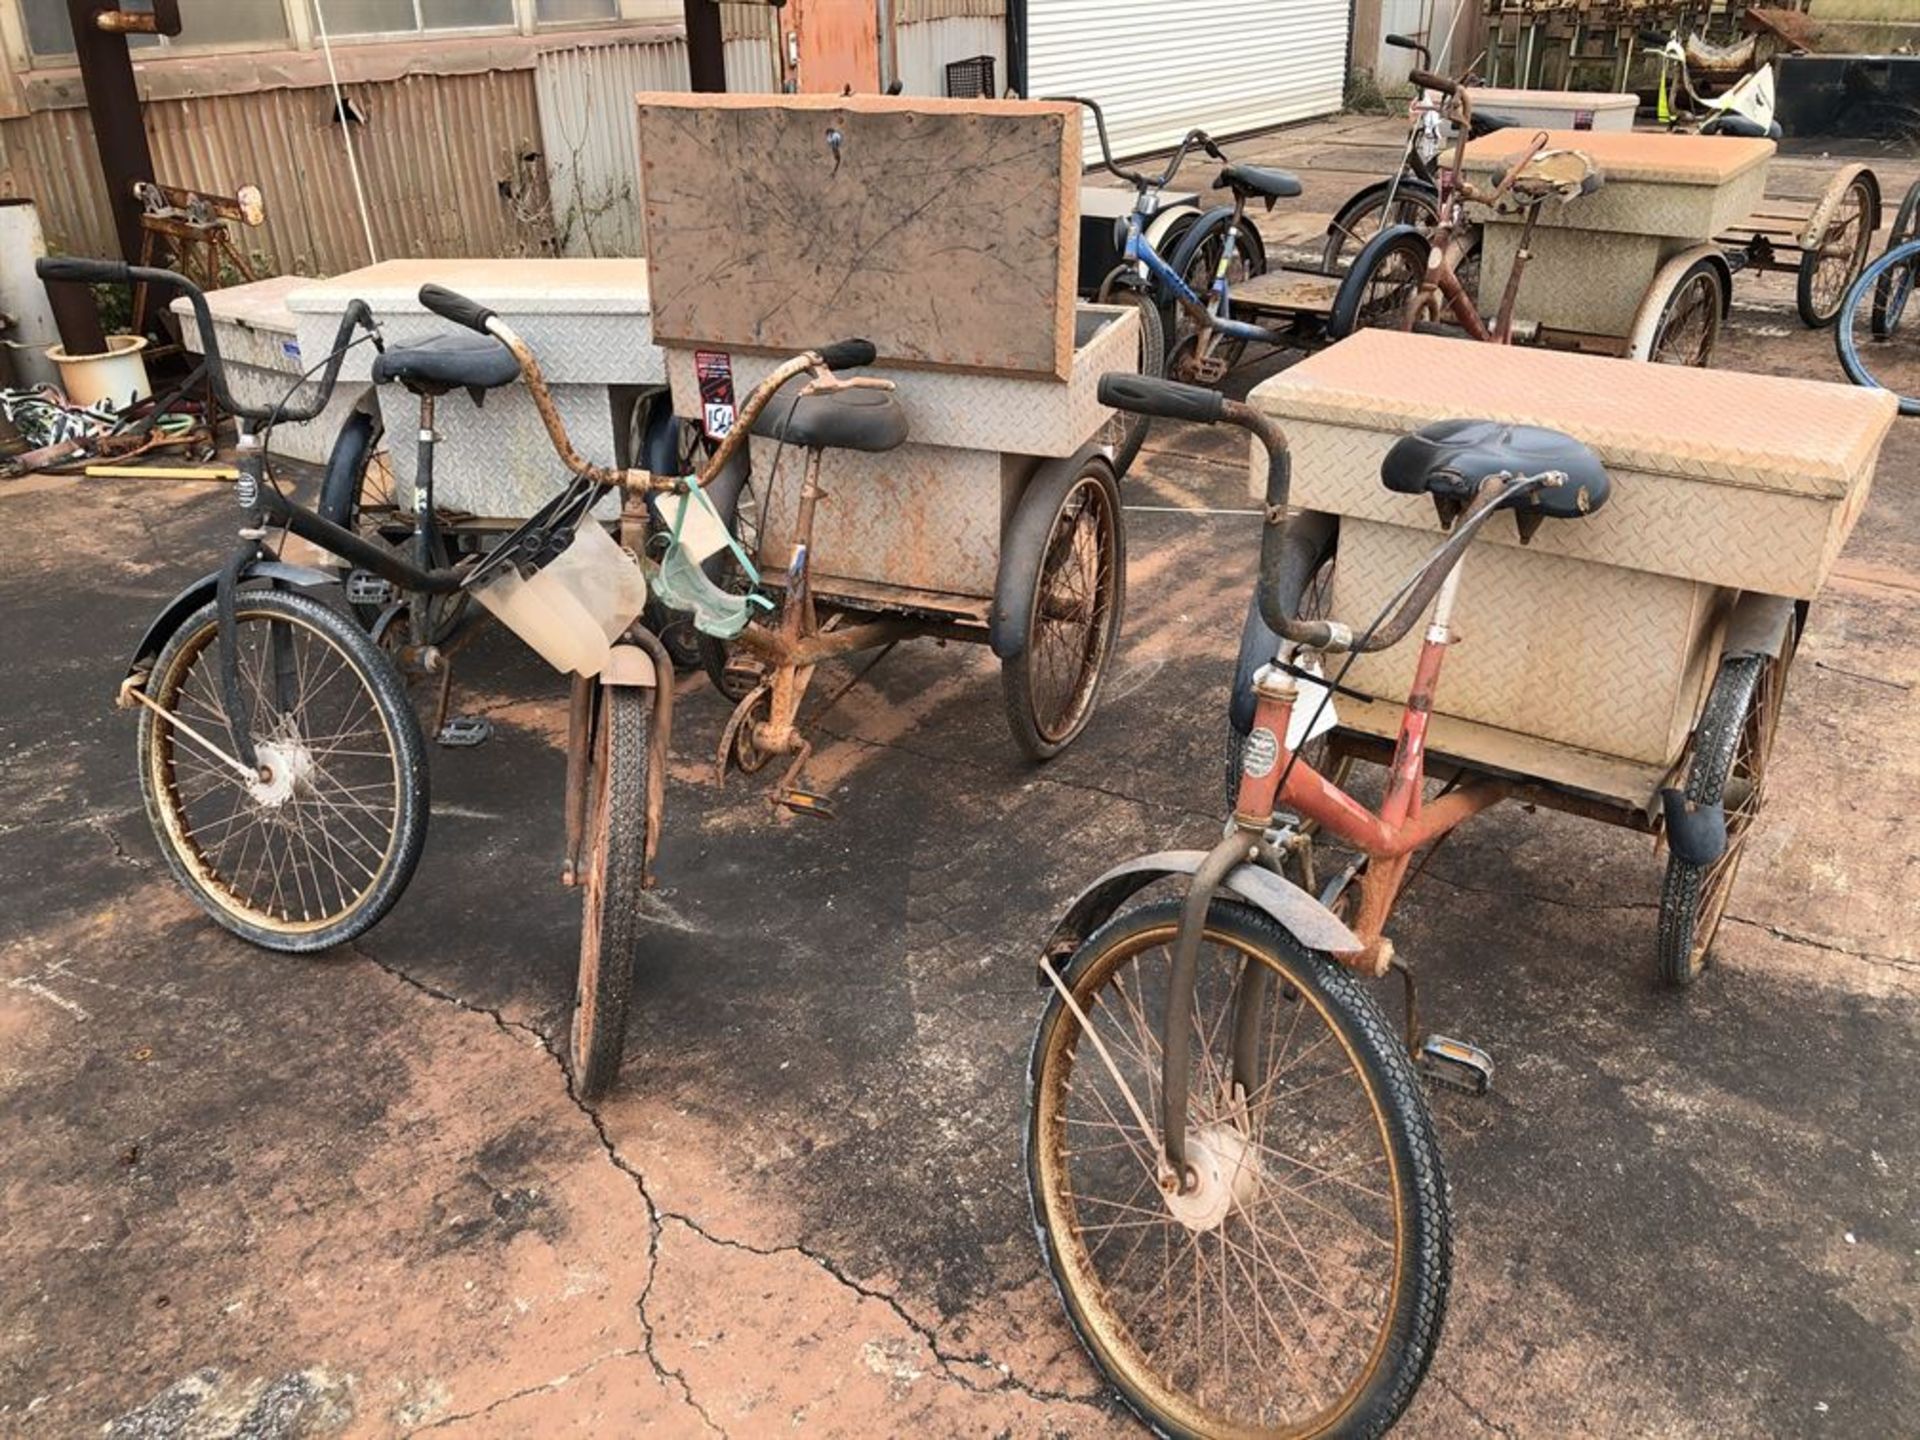 Lot Comprising of (3) Worksman Tricycles (Location: Learning Center)